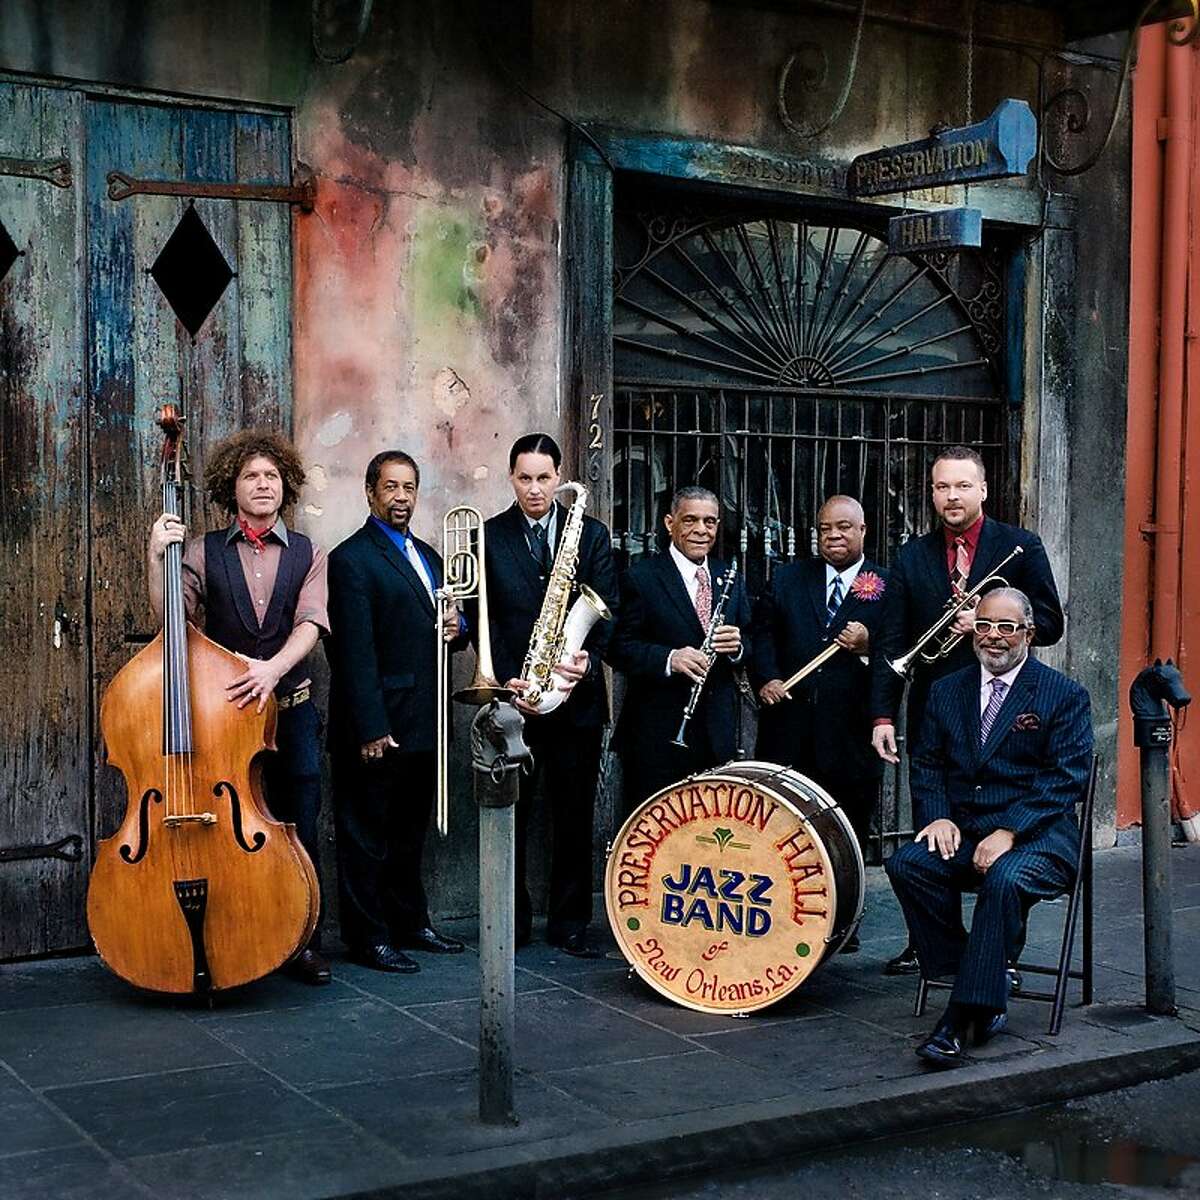 The Preservation Hall Jazz Band will perform at the 2017 Greenwich Town Party.